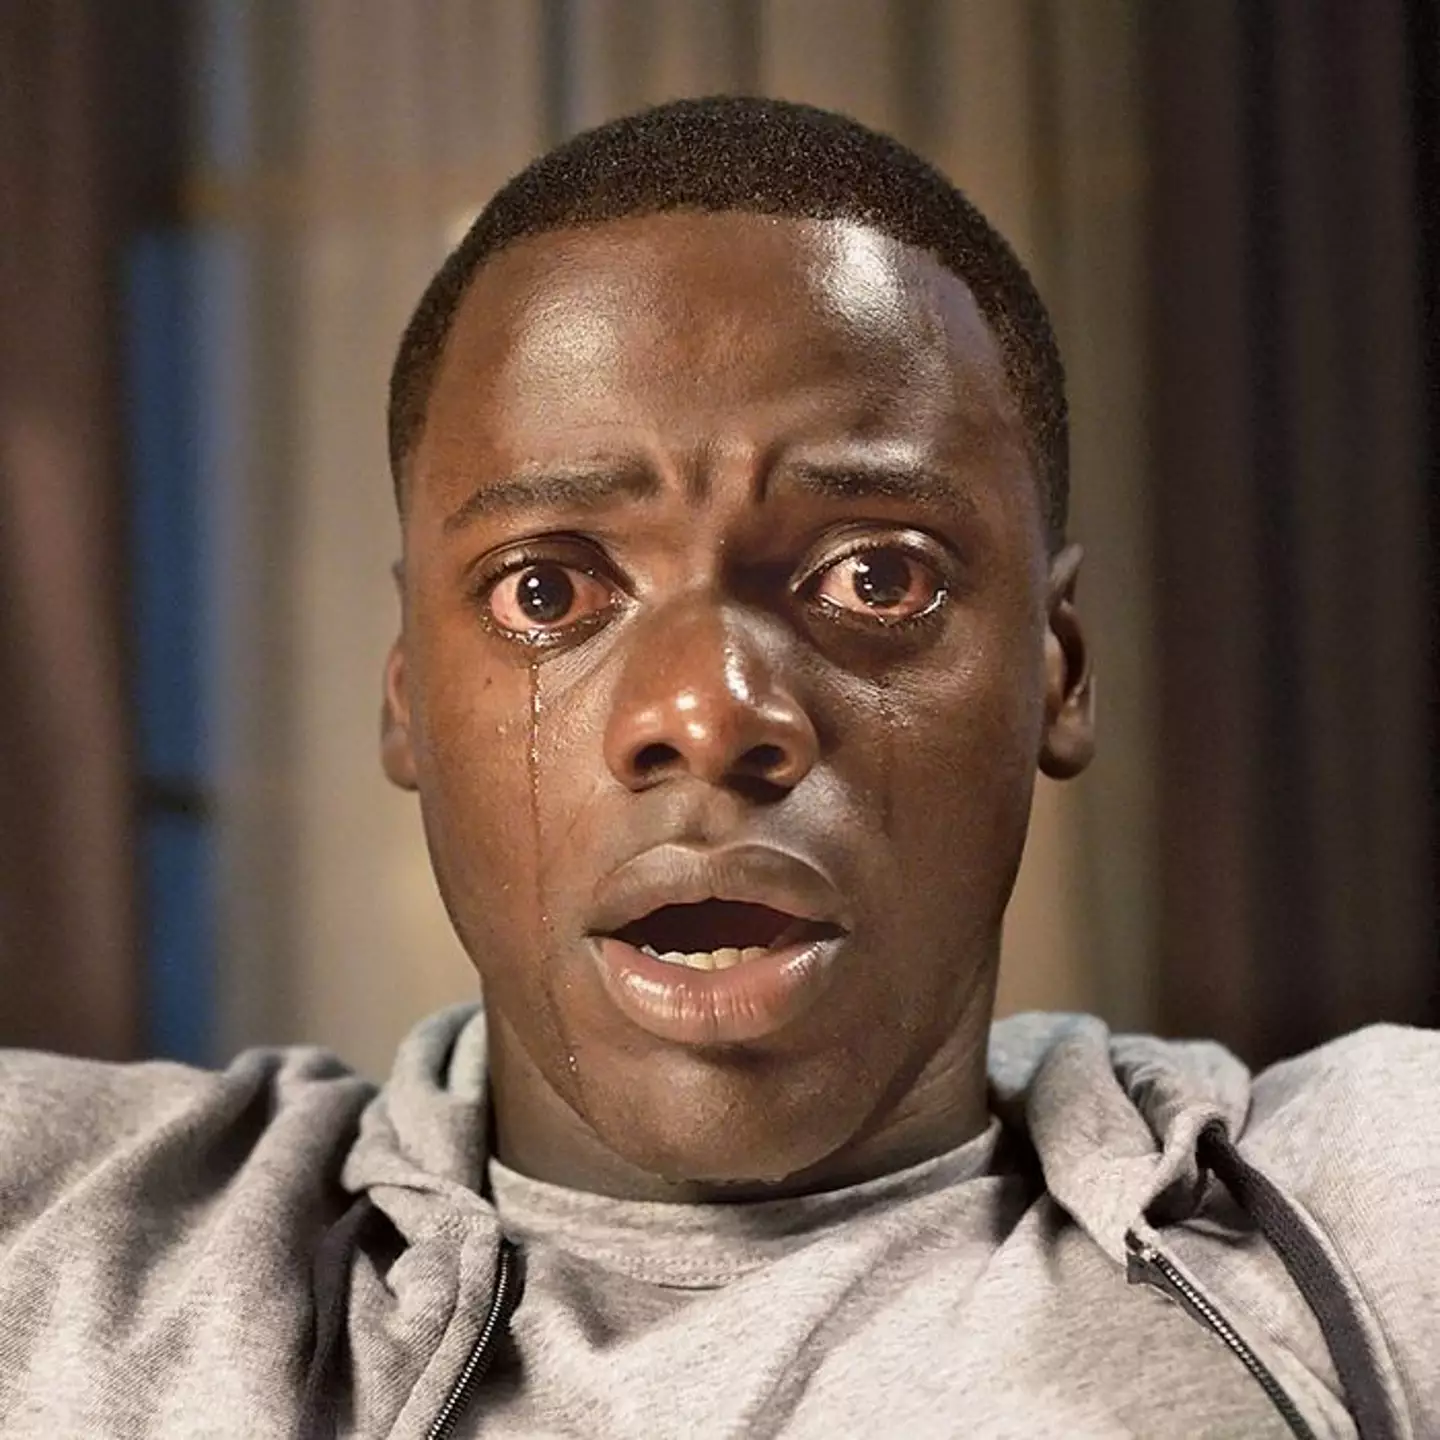 Get Out by Jordan Peele received critical acclaim. (